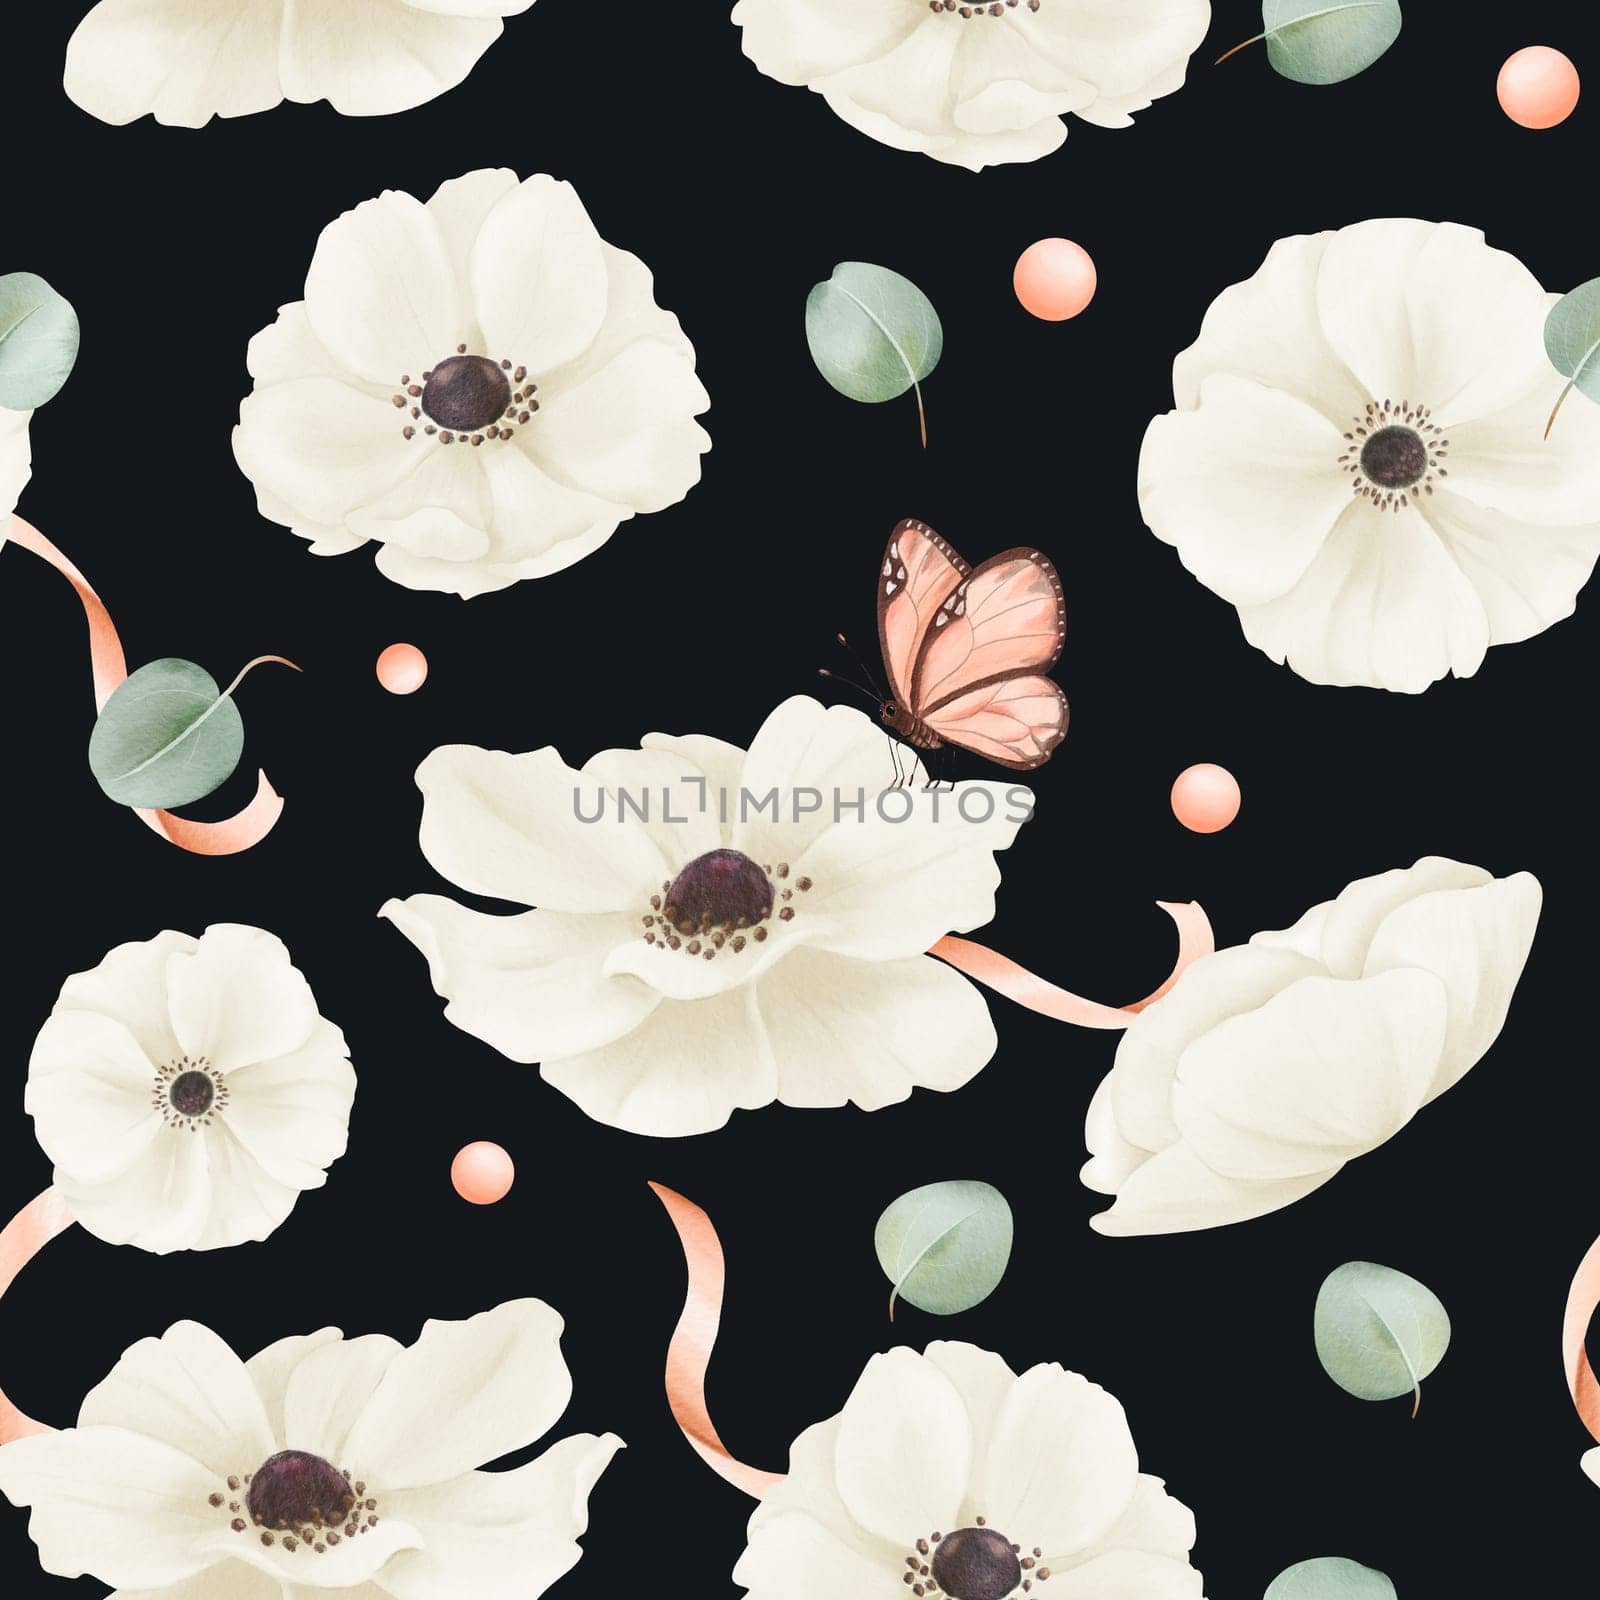 Seamless pattern featuring white watercolor anemones, eucalyptus leaves, satin ribbons, and rhinestones. textile, web design, print materials greeting cards wallpapers gift packaging accessories.